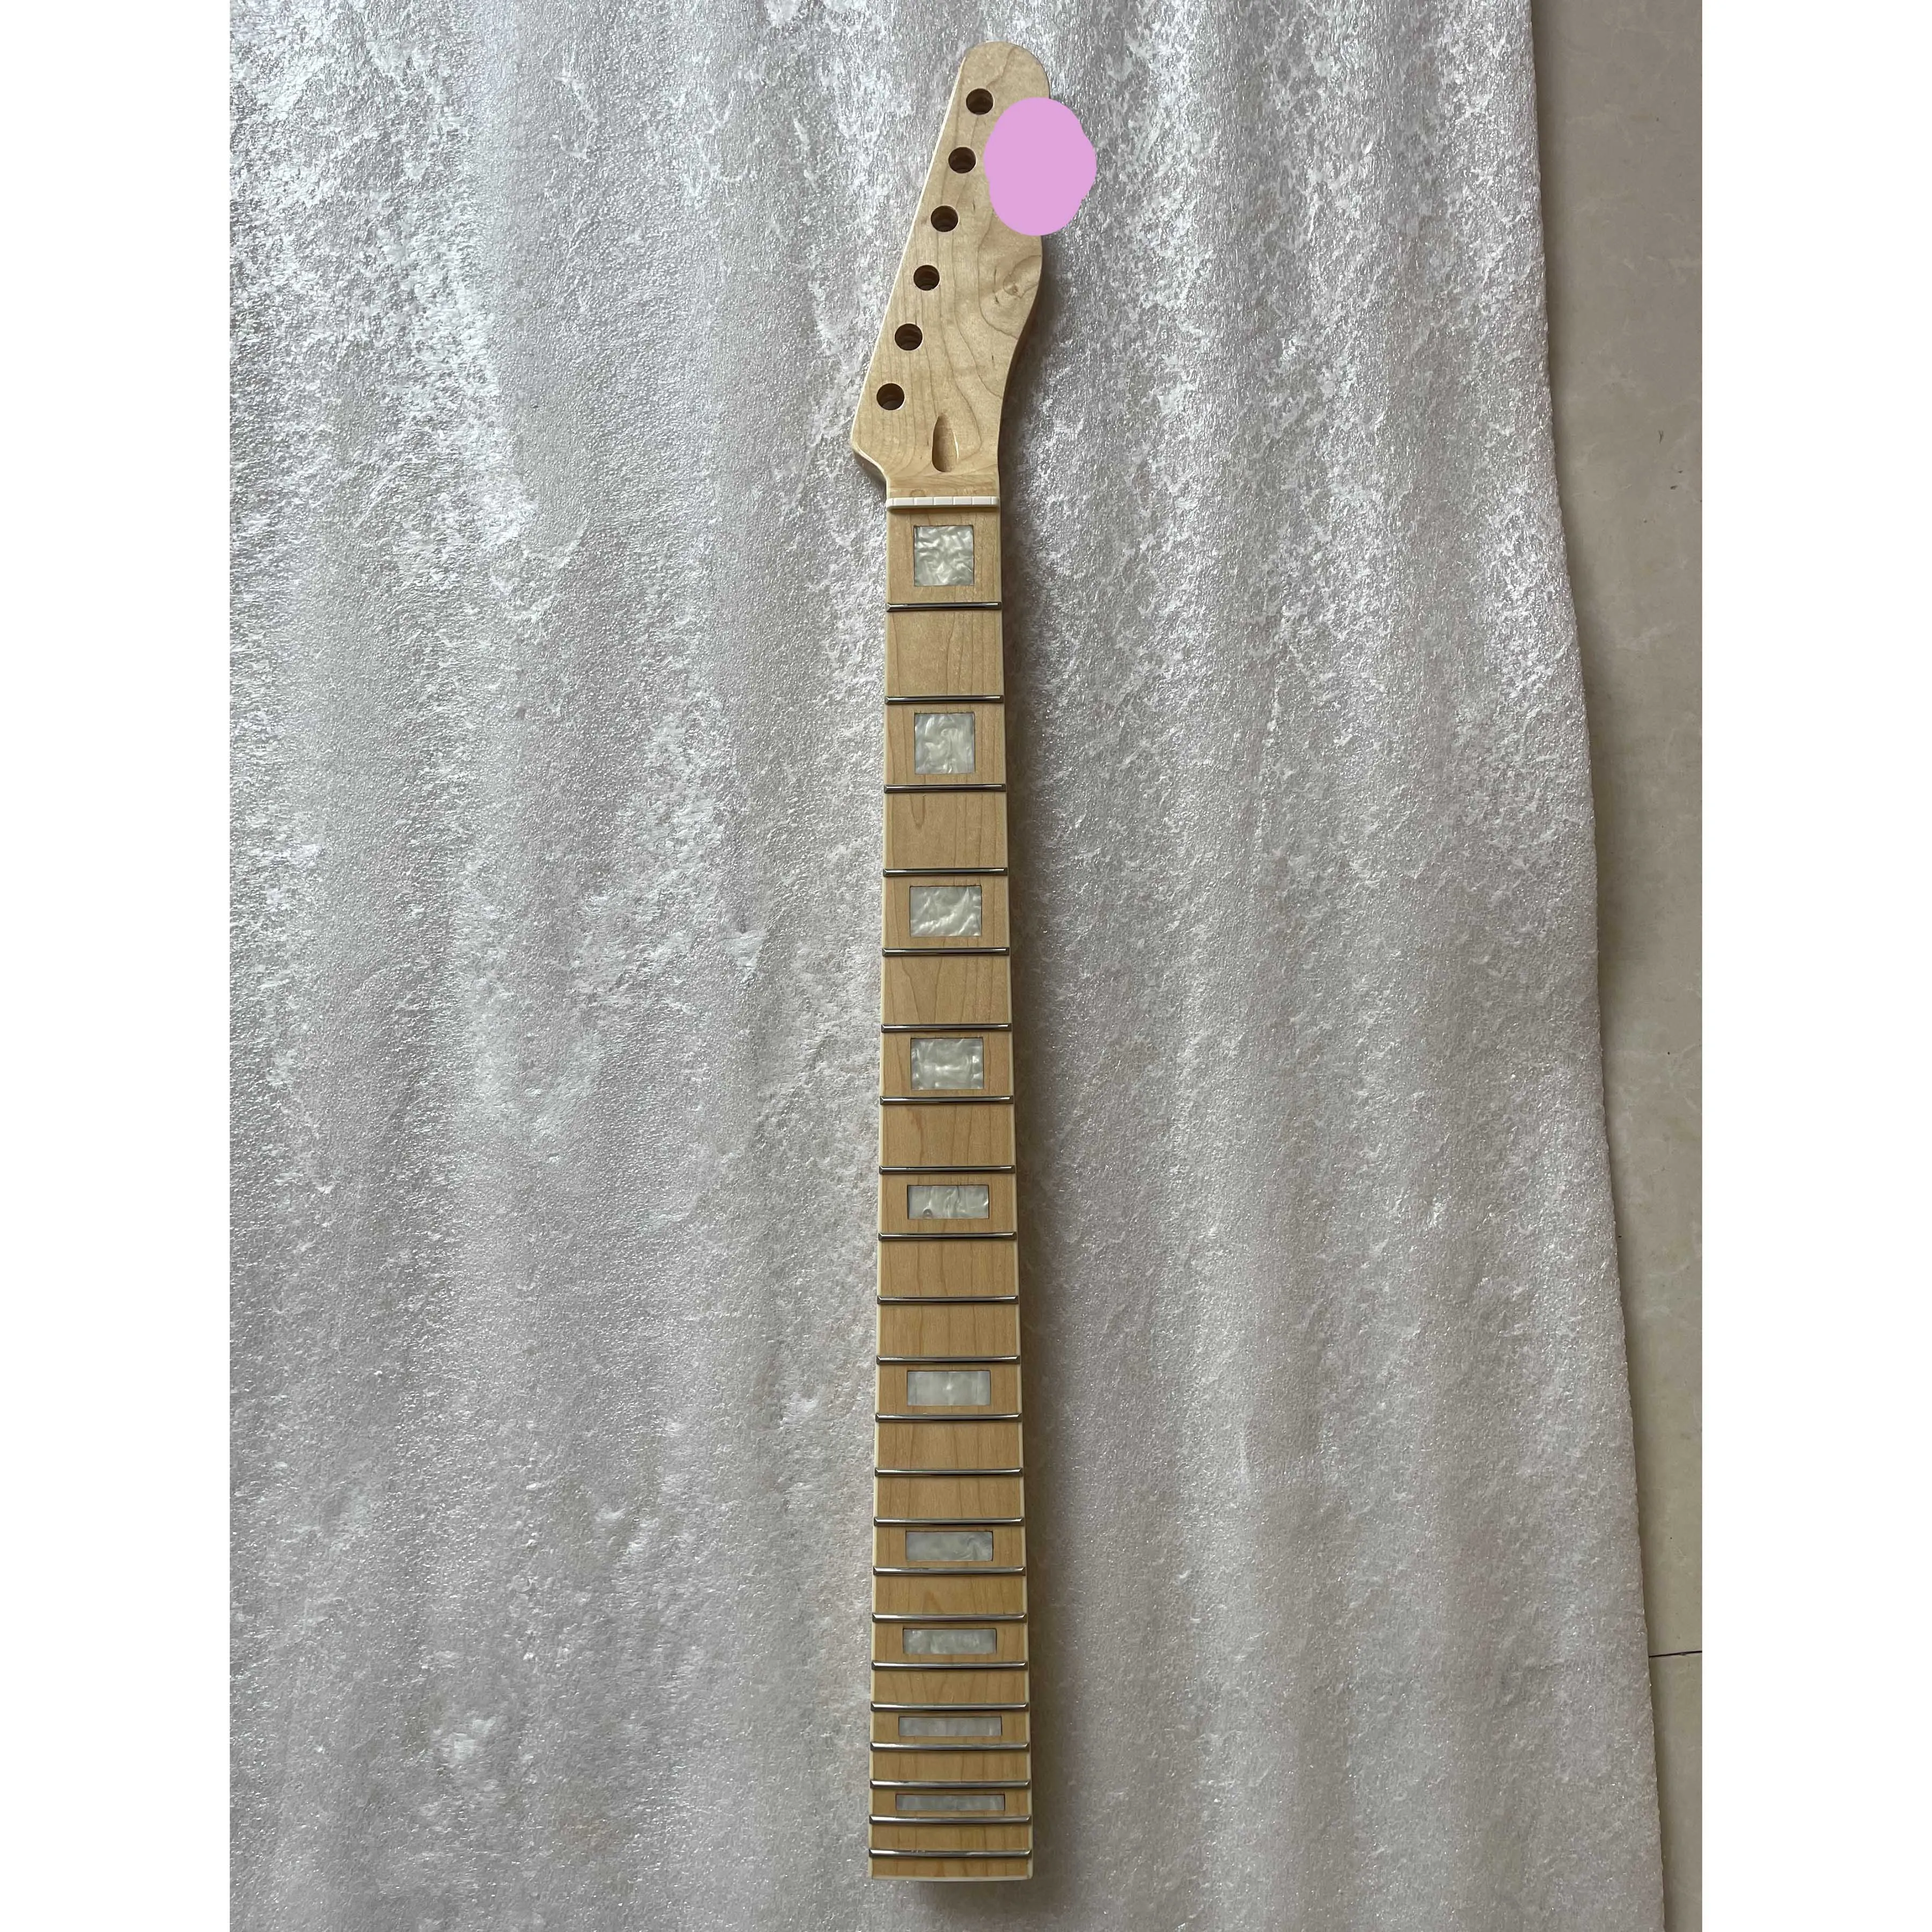 

White Block Inlay Guitar Neck Gloss Finished Replacement Parts, Maple Handle, Real Photos, 22 Frets, Easy to Install